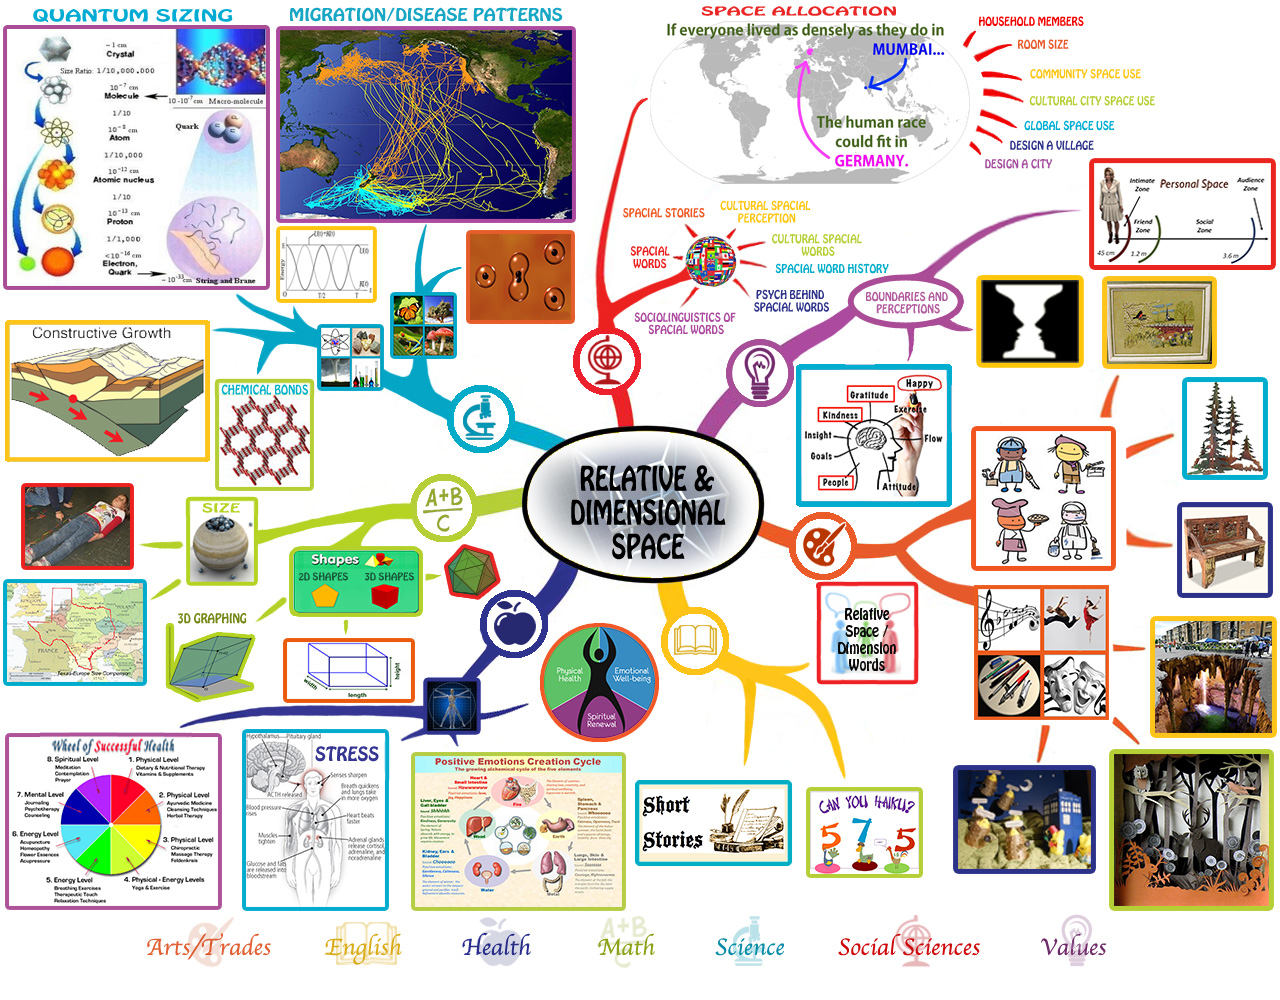 Teaching Everything in the Context of Relative and Dimensional Space, Relative and Dimensional Space Mindmap, Relative and Dimensional Space Lesson Plan, One Community school, One Community education, teaching strategies for life, curriculum for life, One Community, transformational education, open source education, free-shared education, eco-education, curriculum for life, strategies of leadership, education for life, transformational education, new paradigm learning, genius training, the ultimate classroom, teaching tools for life, for the highest good of all, Waldorf, Study Technology, Study Tech, Montessori, Reggio, 8 Intelligences, Bloom's Taxonomy, Orff, our children are our future, the future of kids, One Community kids, One Community families, education for life, transformational living, thinking out of the box, learning how to learn - not what to learn, learning to think, using your brain for a change, brainy builder